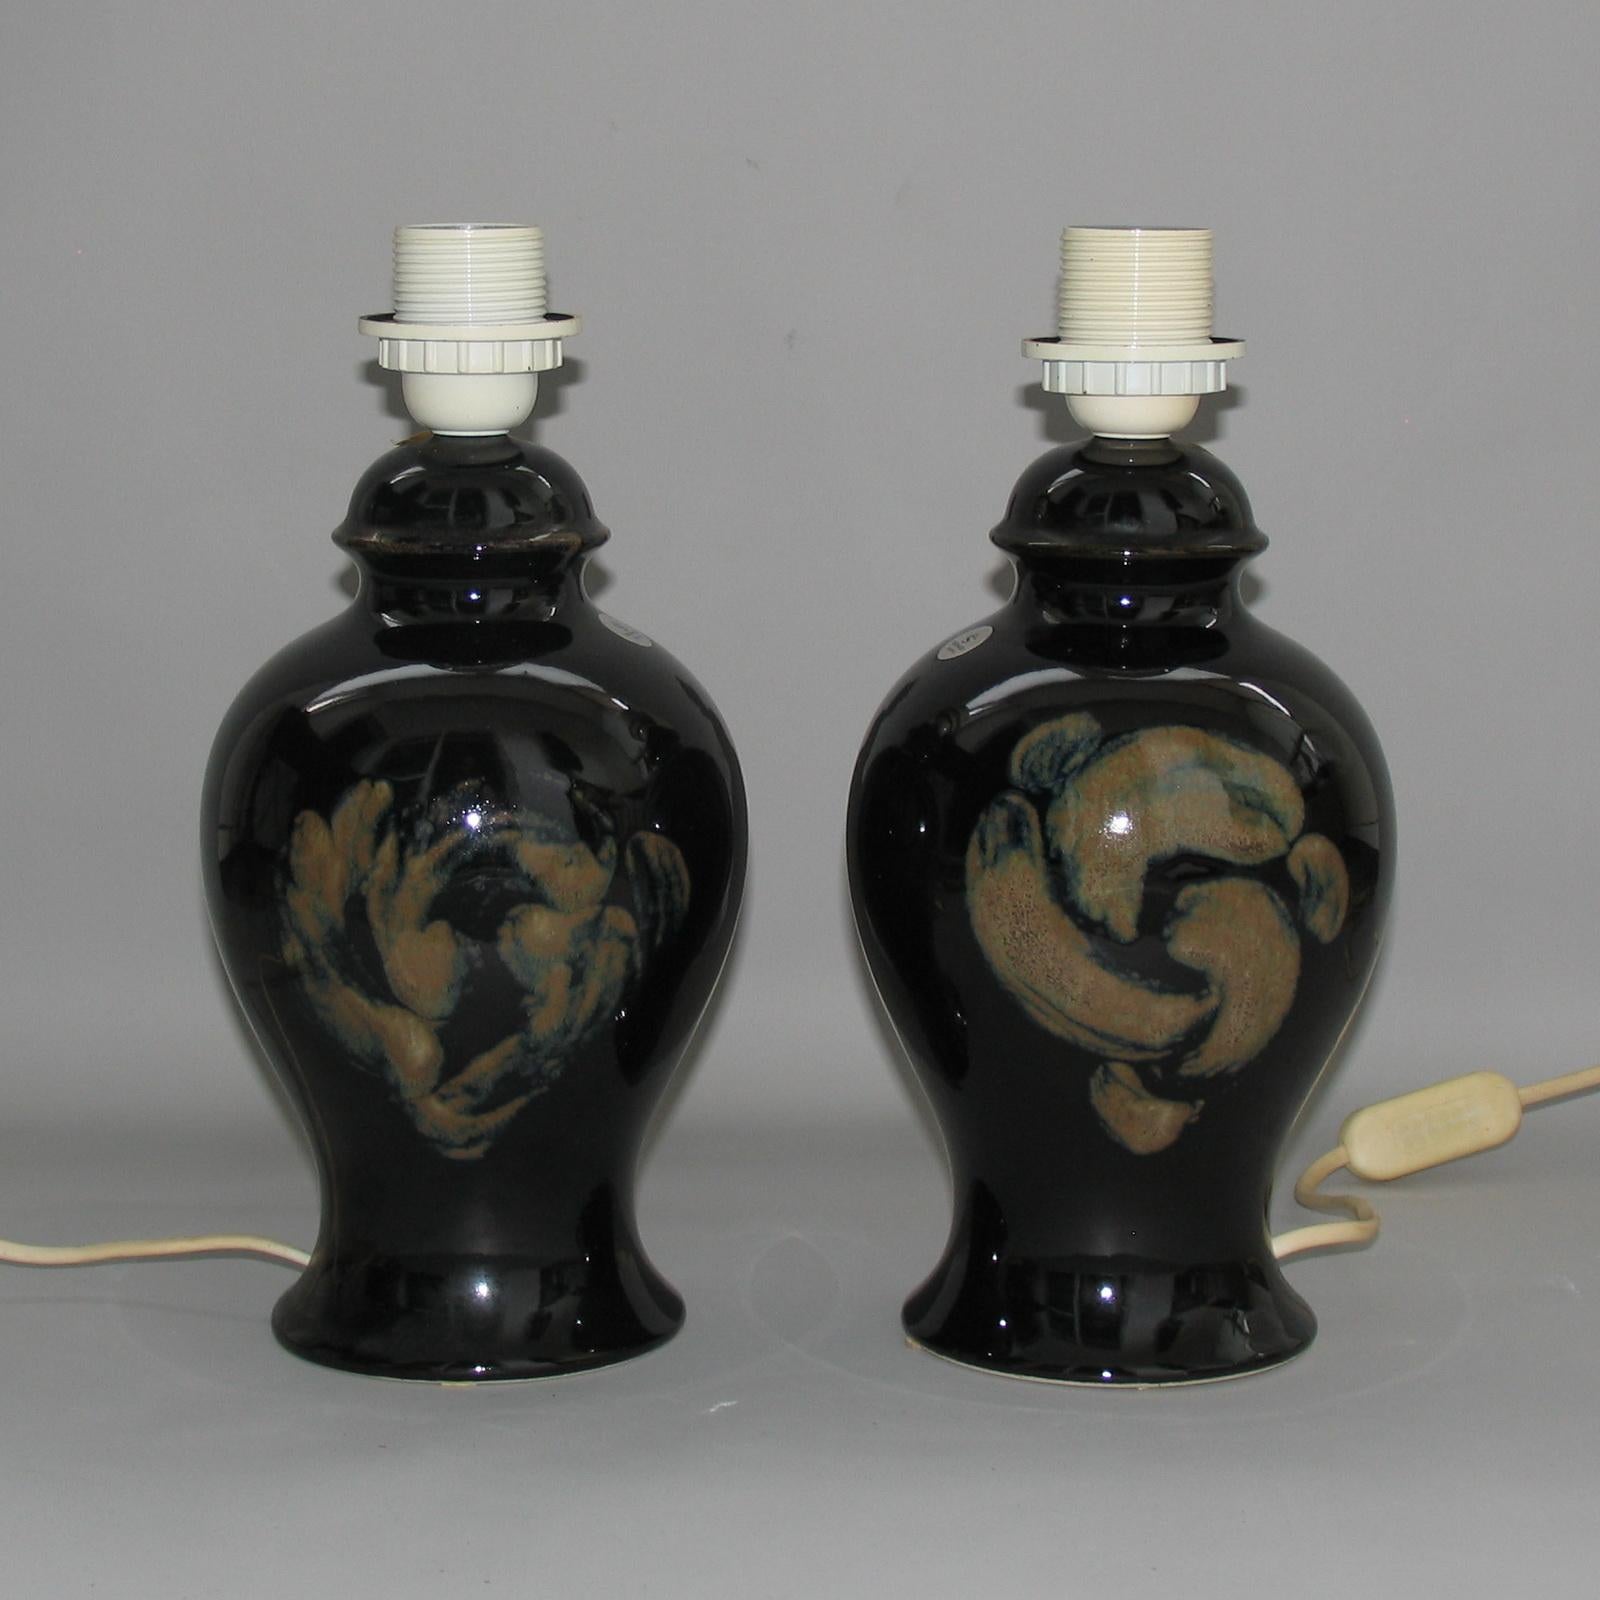 Kent Ericsson and Carl-Harry Stalhane Rare Pair of Ceramic Table Lamps For Sale 2